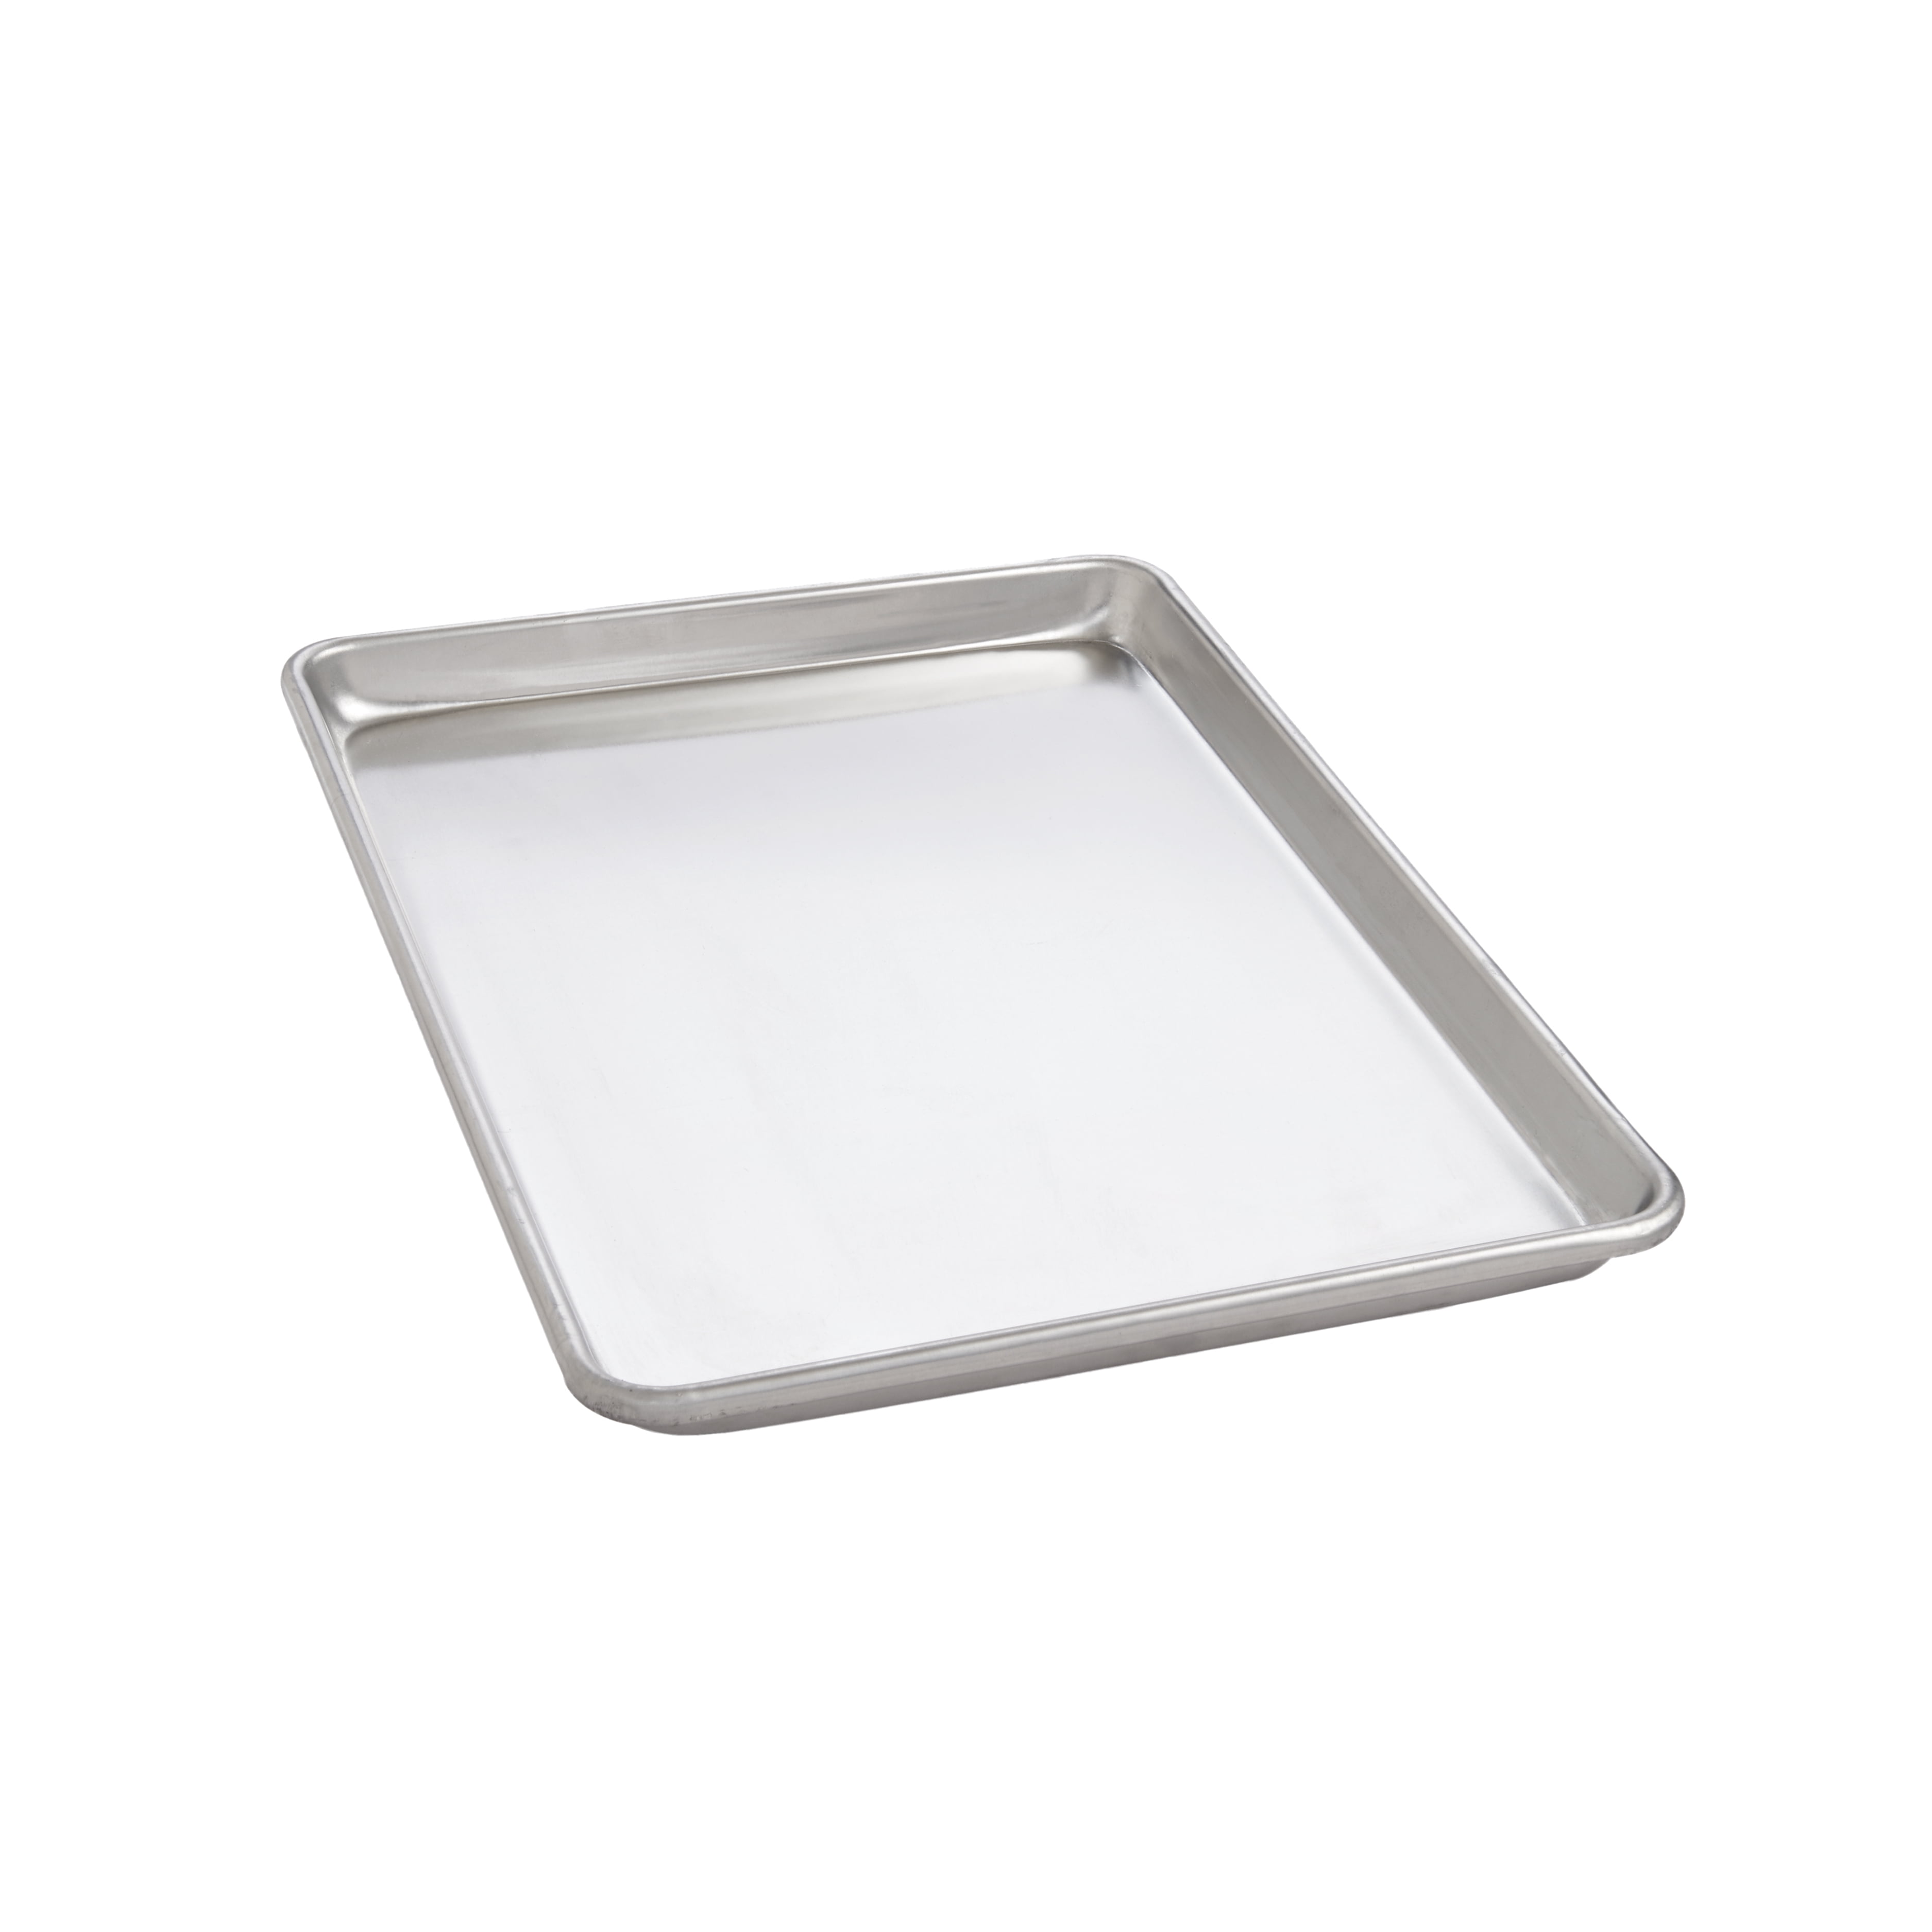 Mrs. Anderson's Baking 10 Fluted Cake Pan